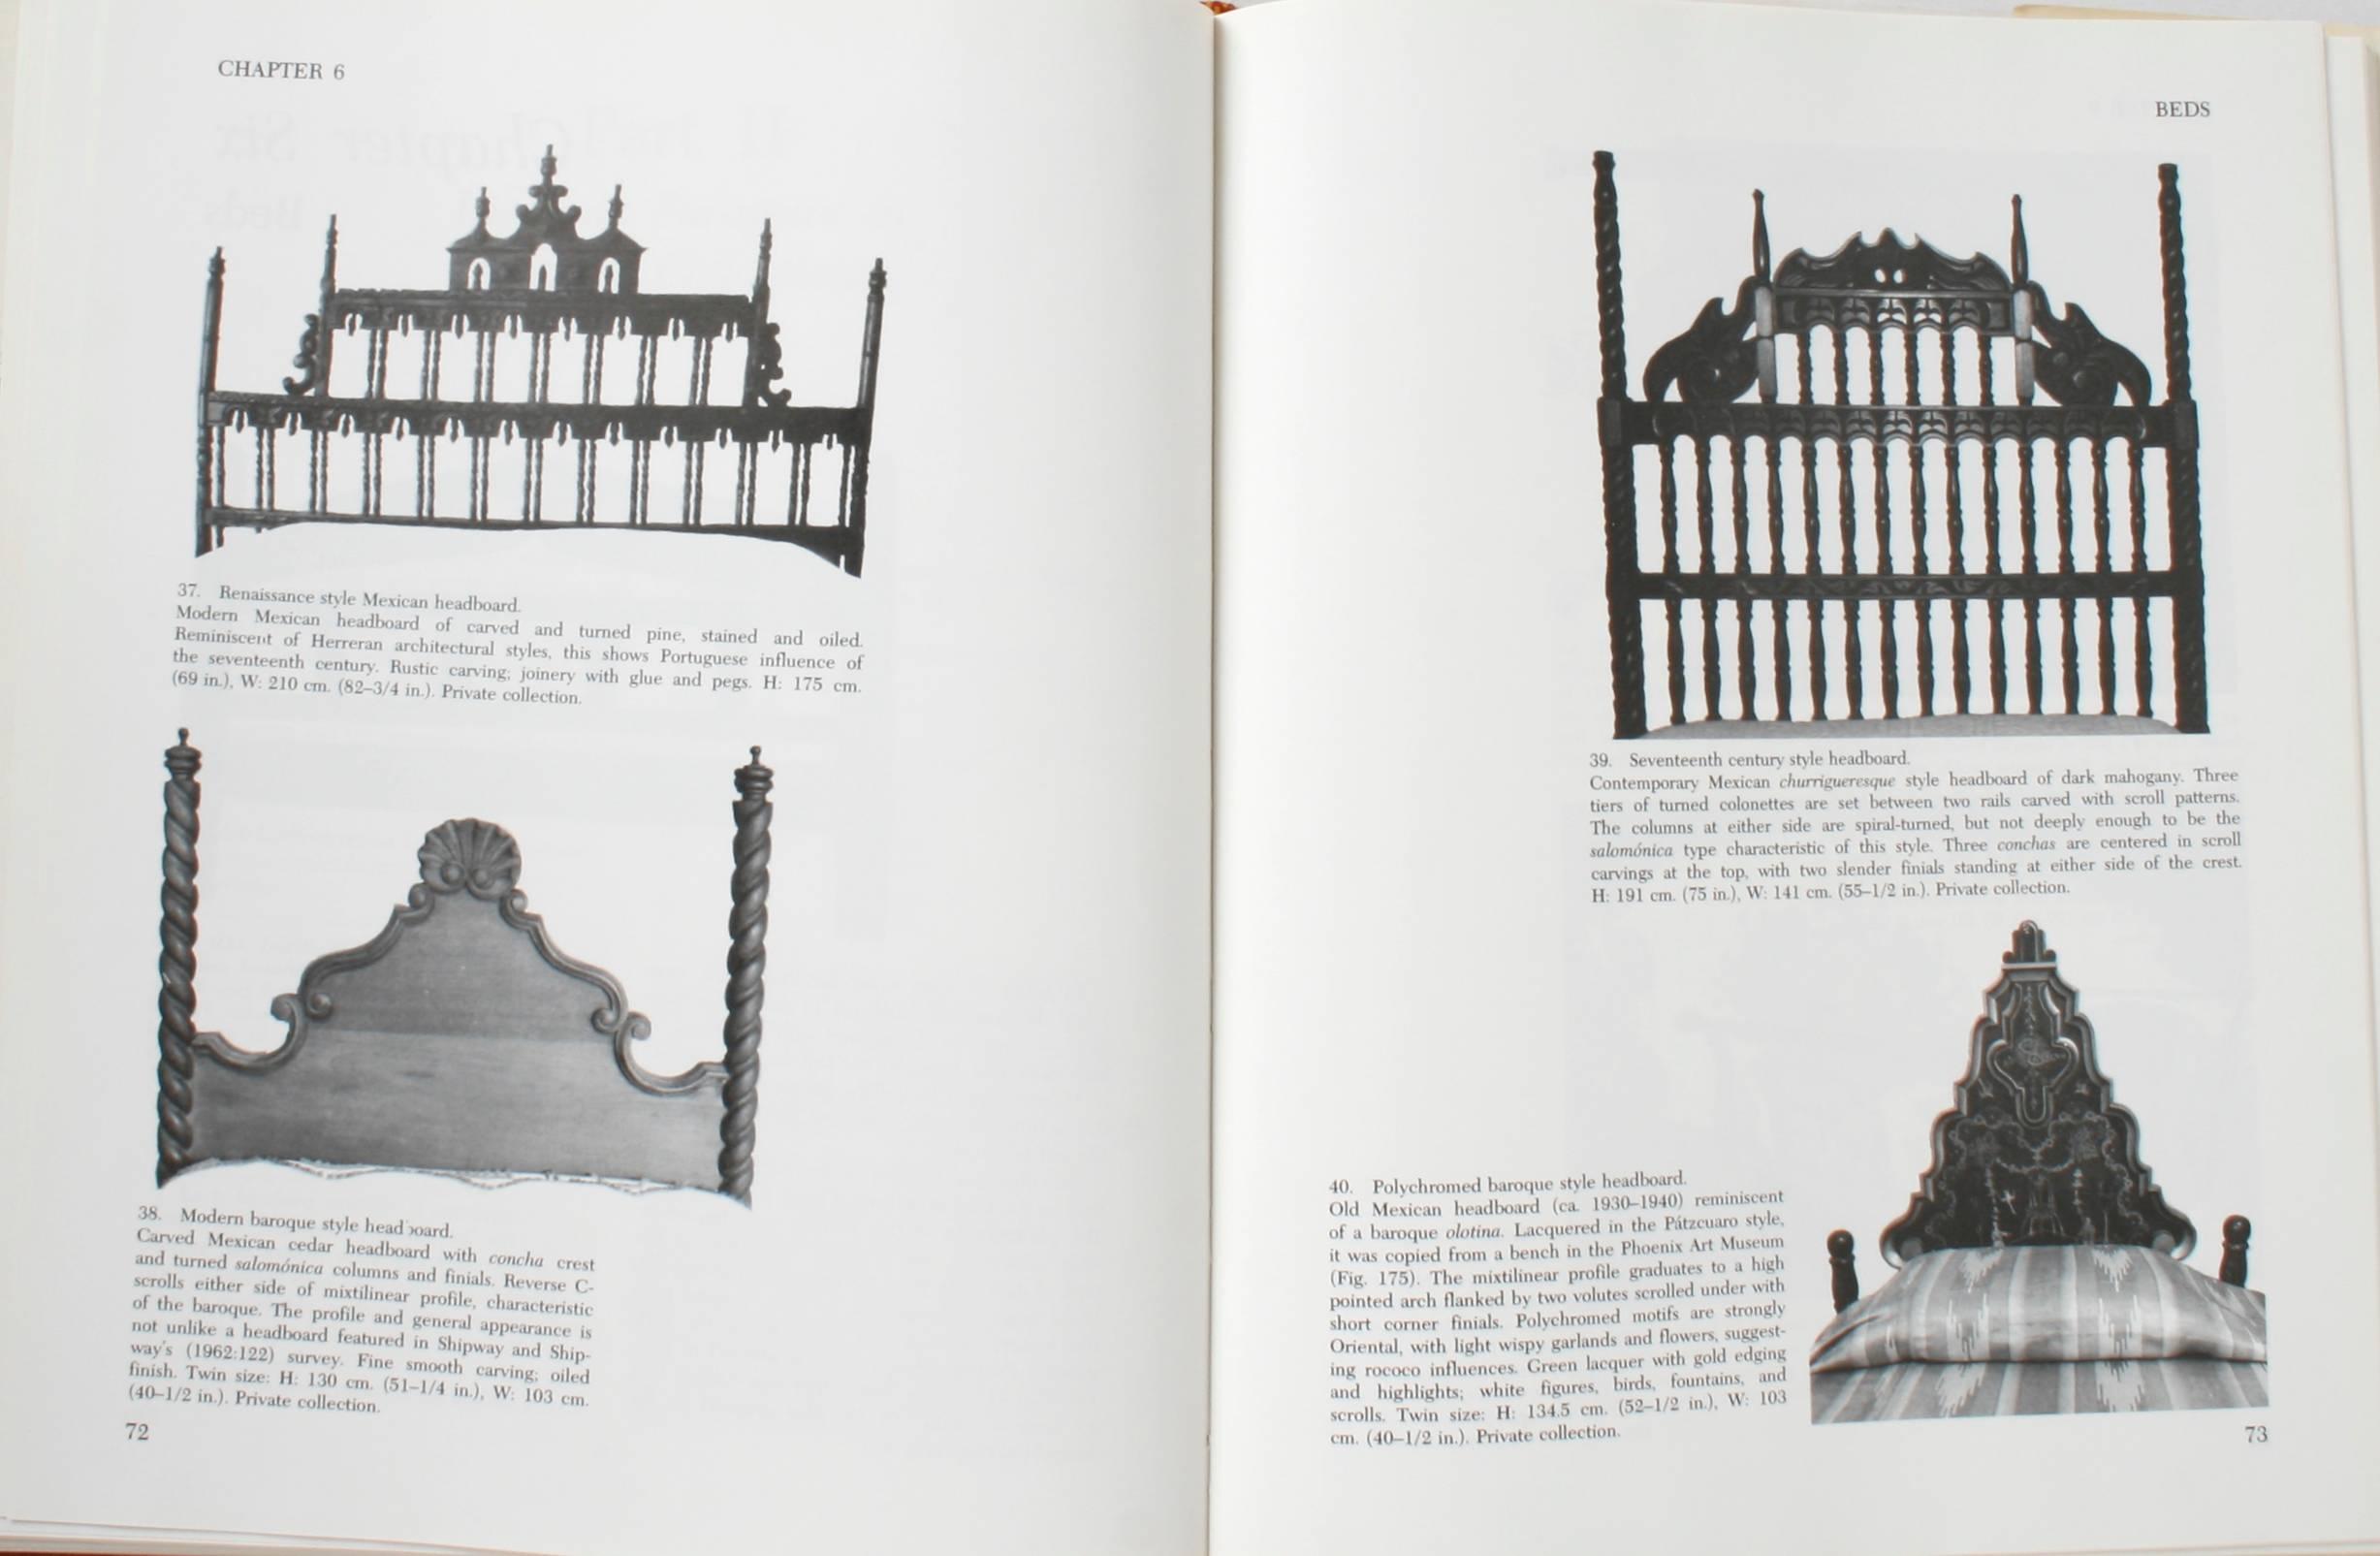 Hispanic Furniture: An American Collection from the Southwest by Sali Barnett Katz. Architectural Book Publishing Co., Connecticut, 1986. A practical guide to Hispanic furniture. it explores the full range of classic Spanish design from its origins